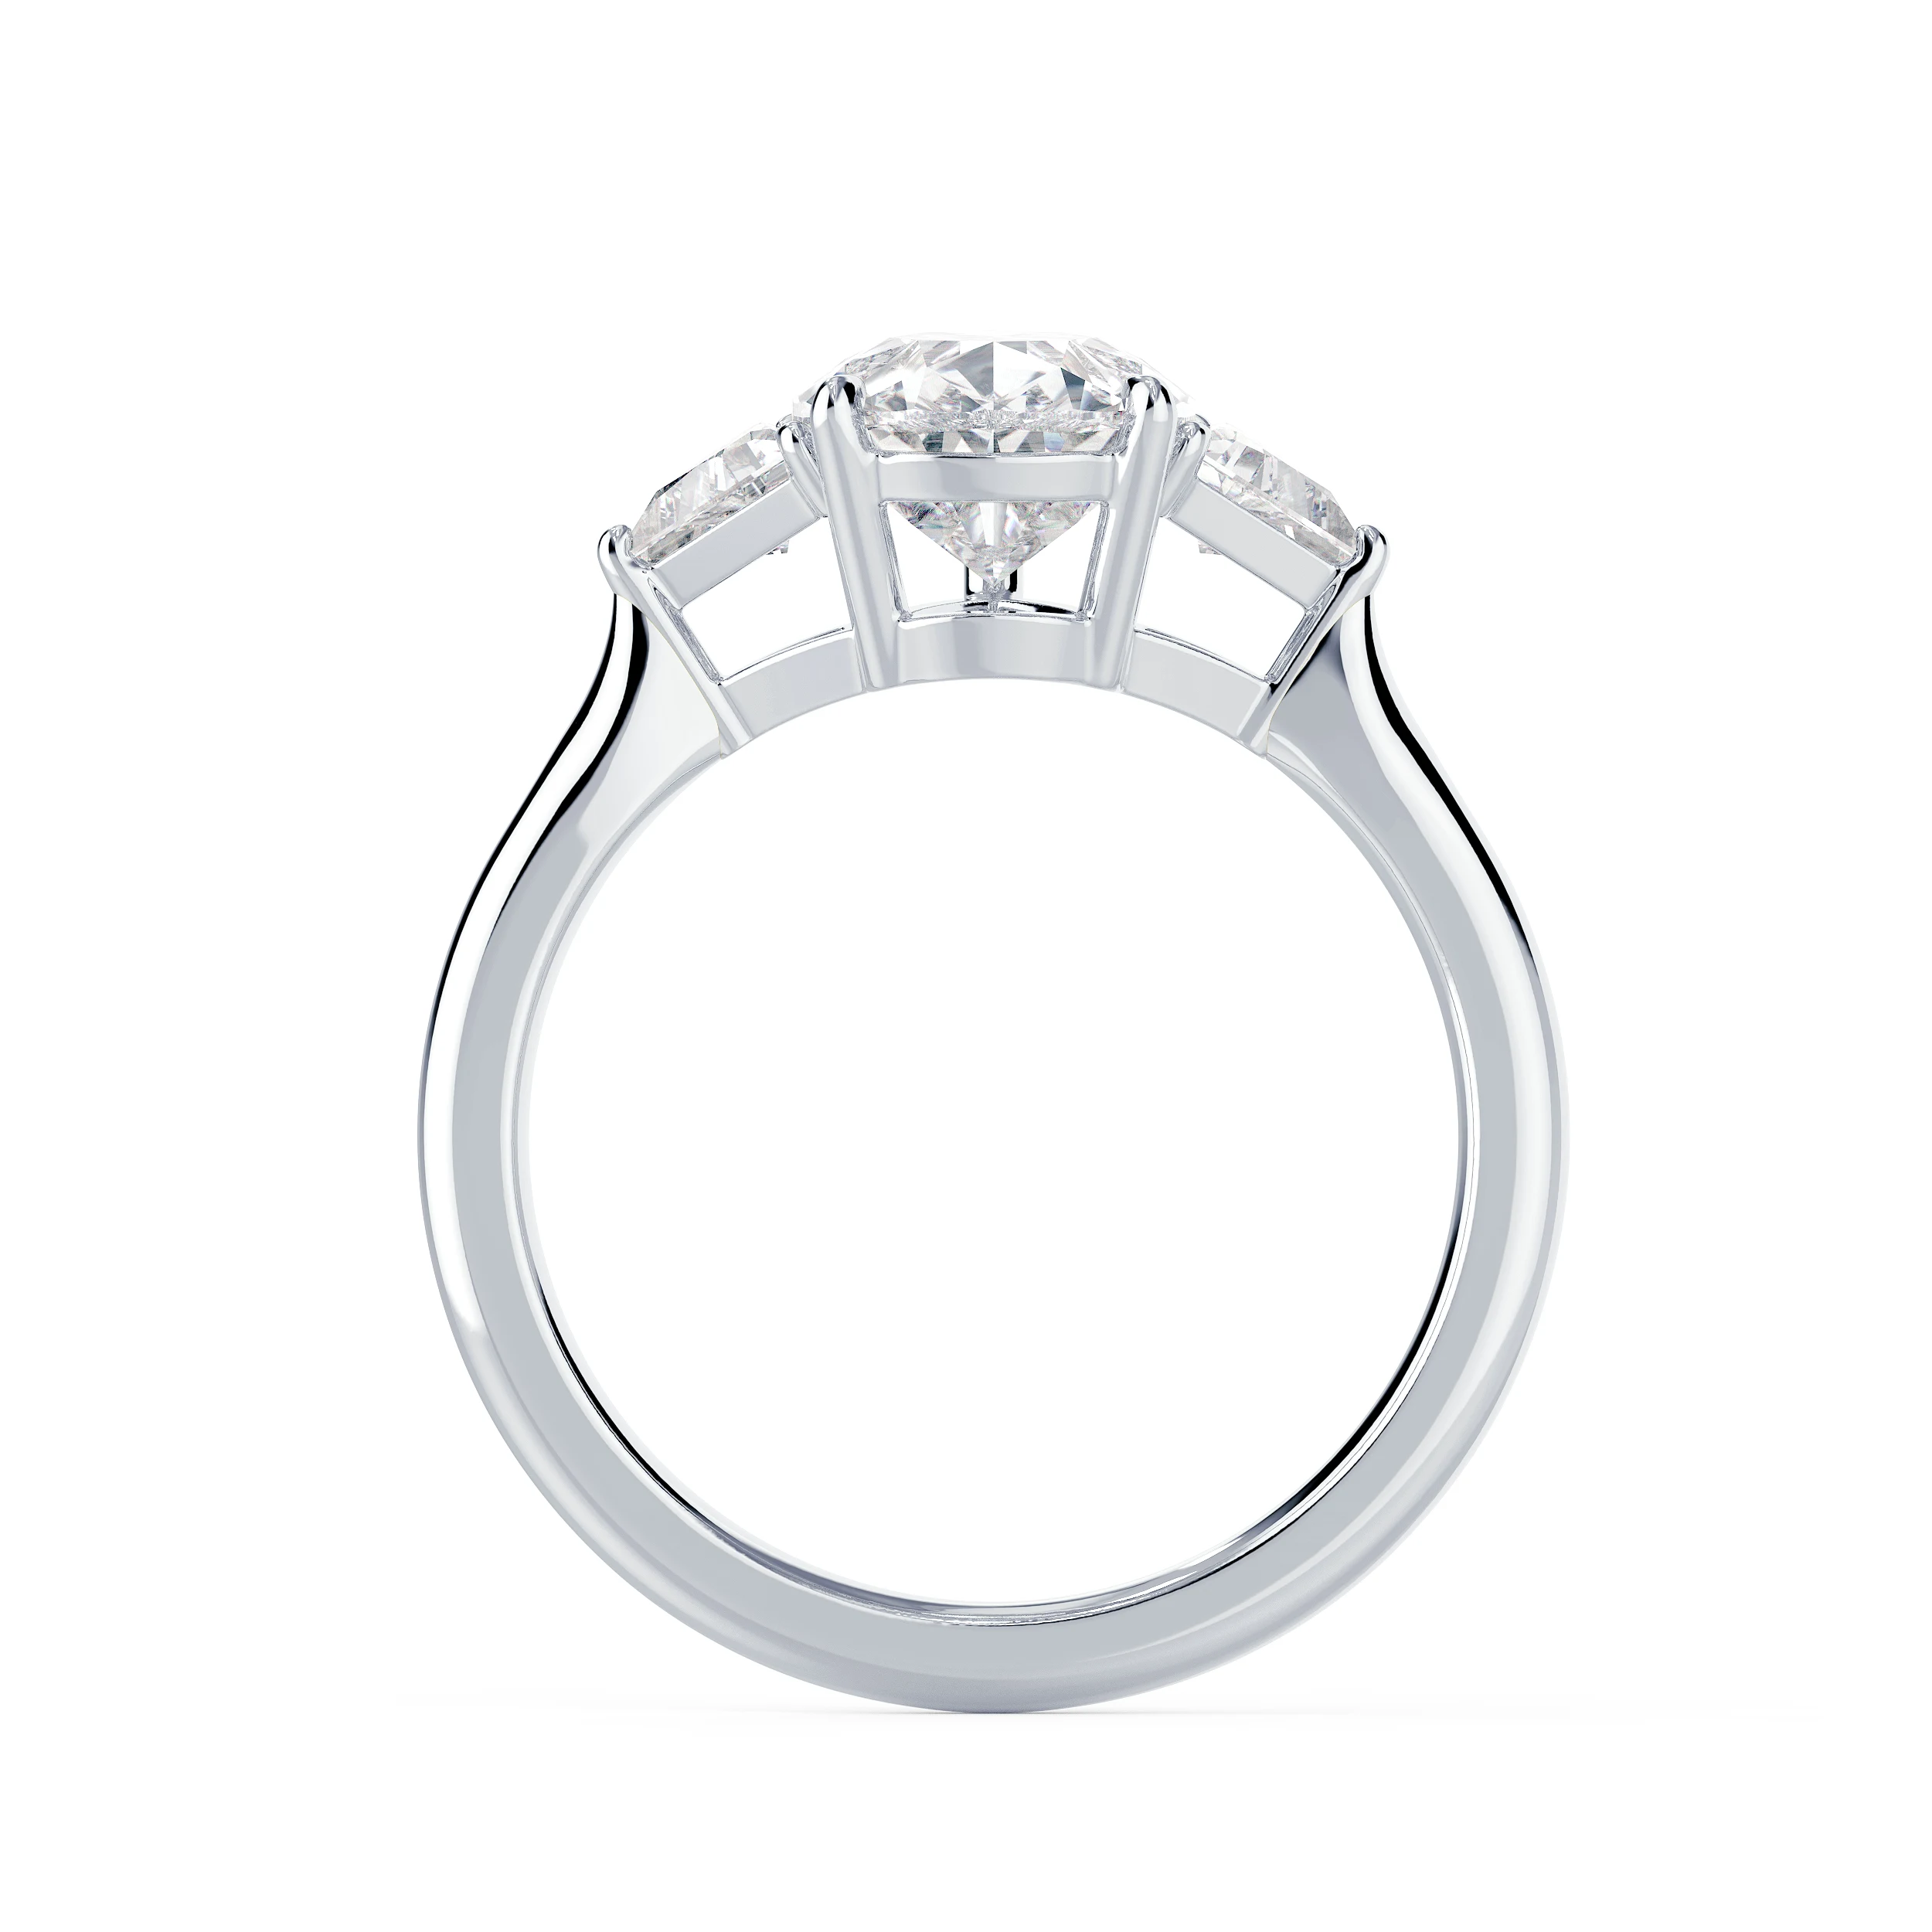 White Gold Pear and Trillion Diamond Engagement Ring featuring Hand Selected Lab Diamonds (Profile View)